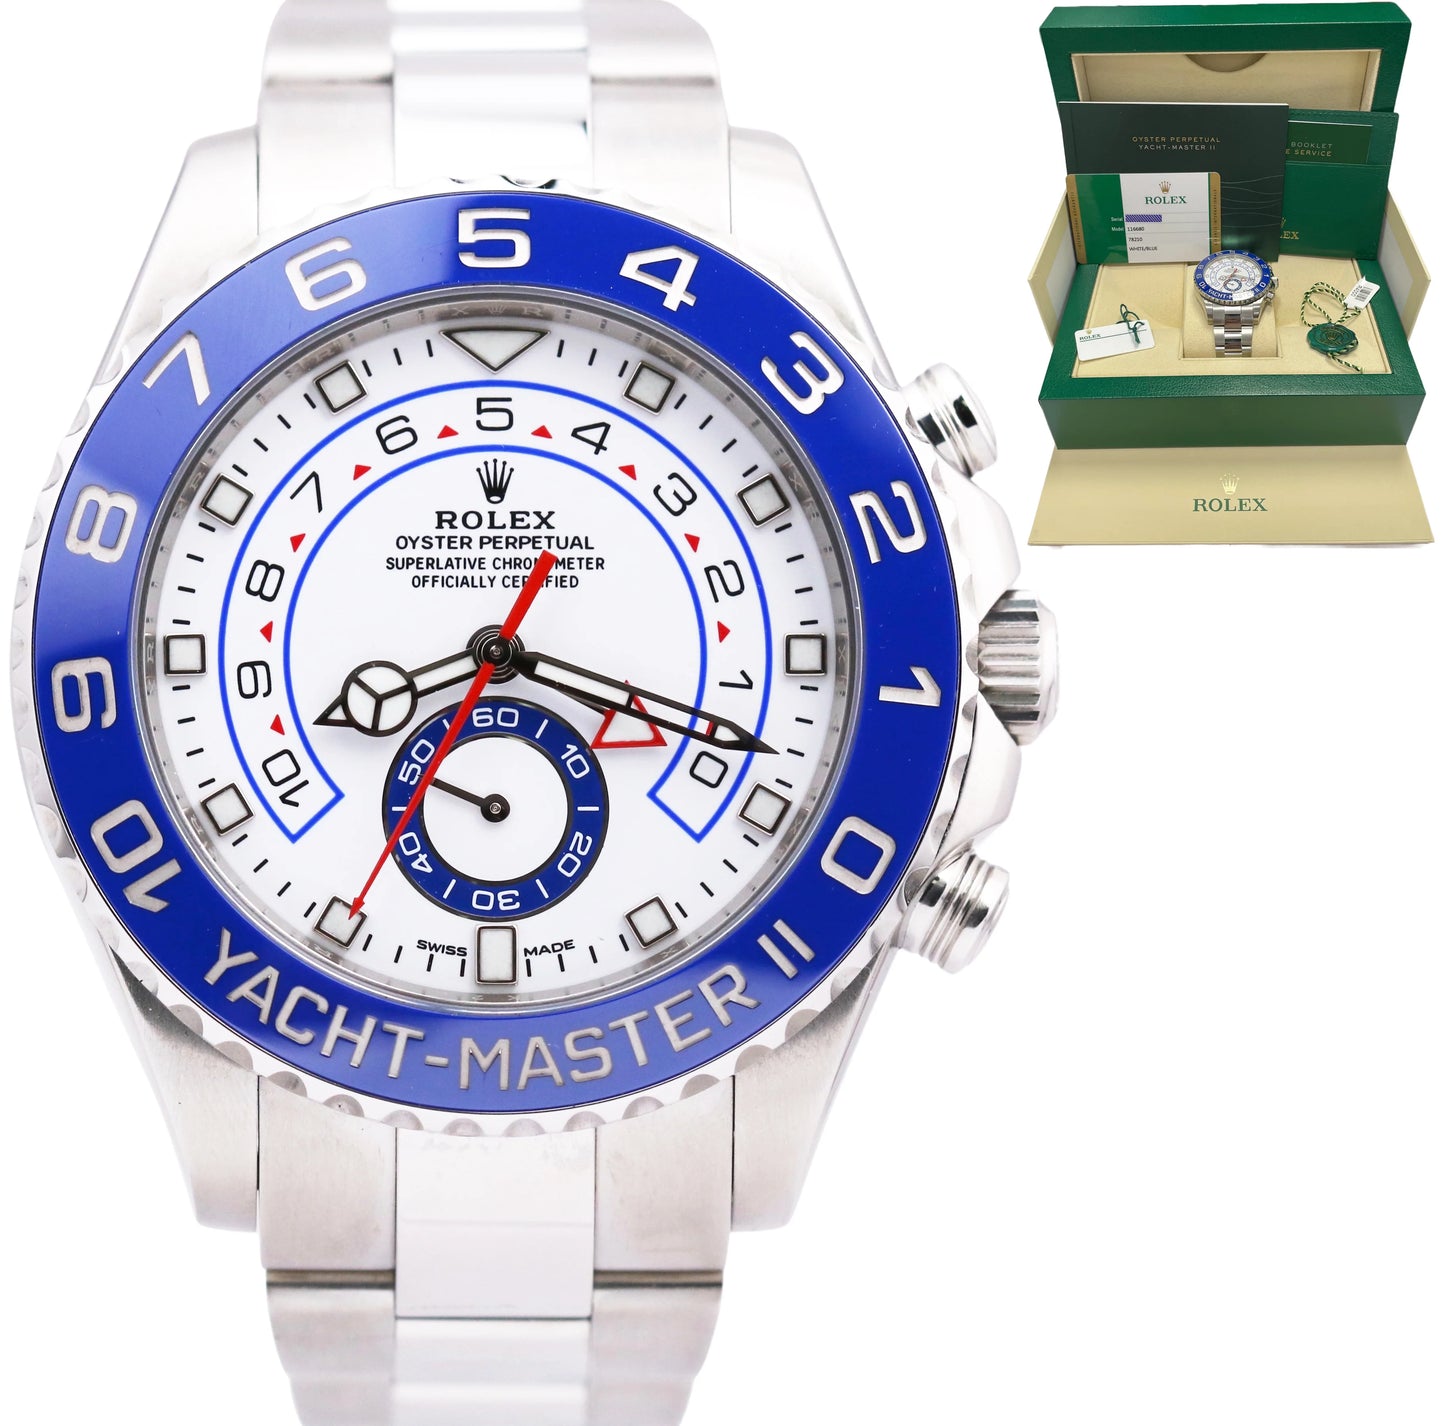 2019 BOX PAPERS Rolex Yacht-Master II 44mm NEWEST HANDS White Blue 116680 Watch